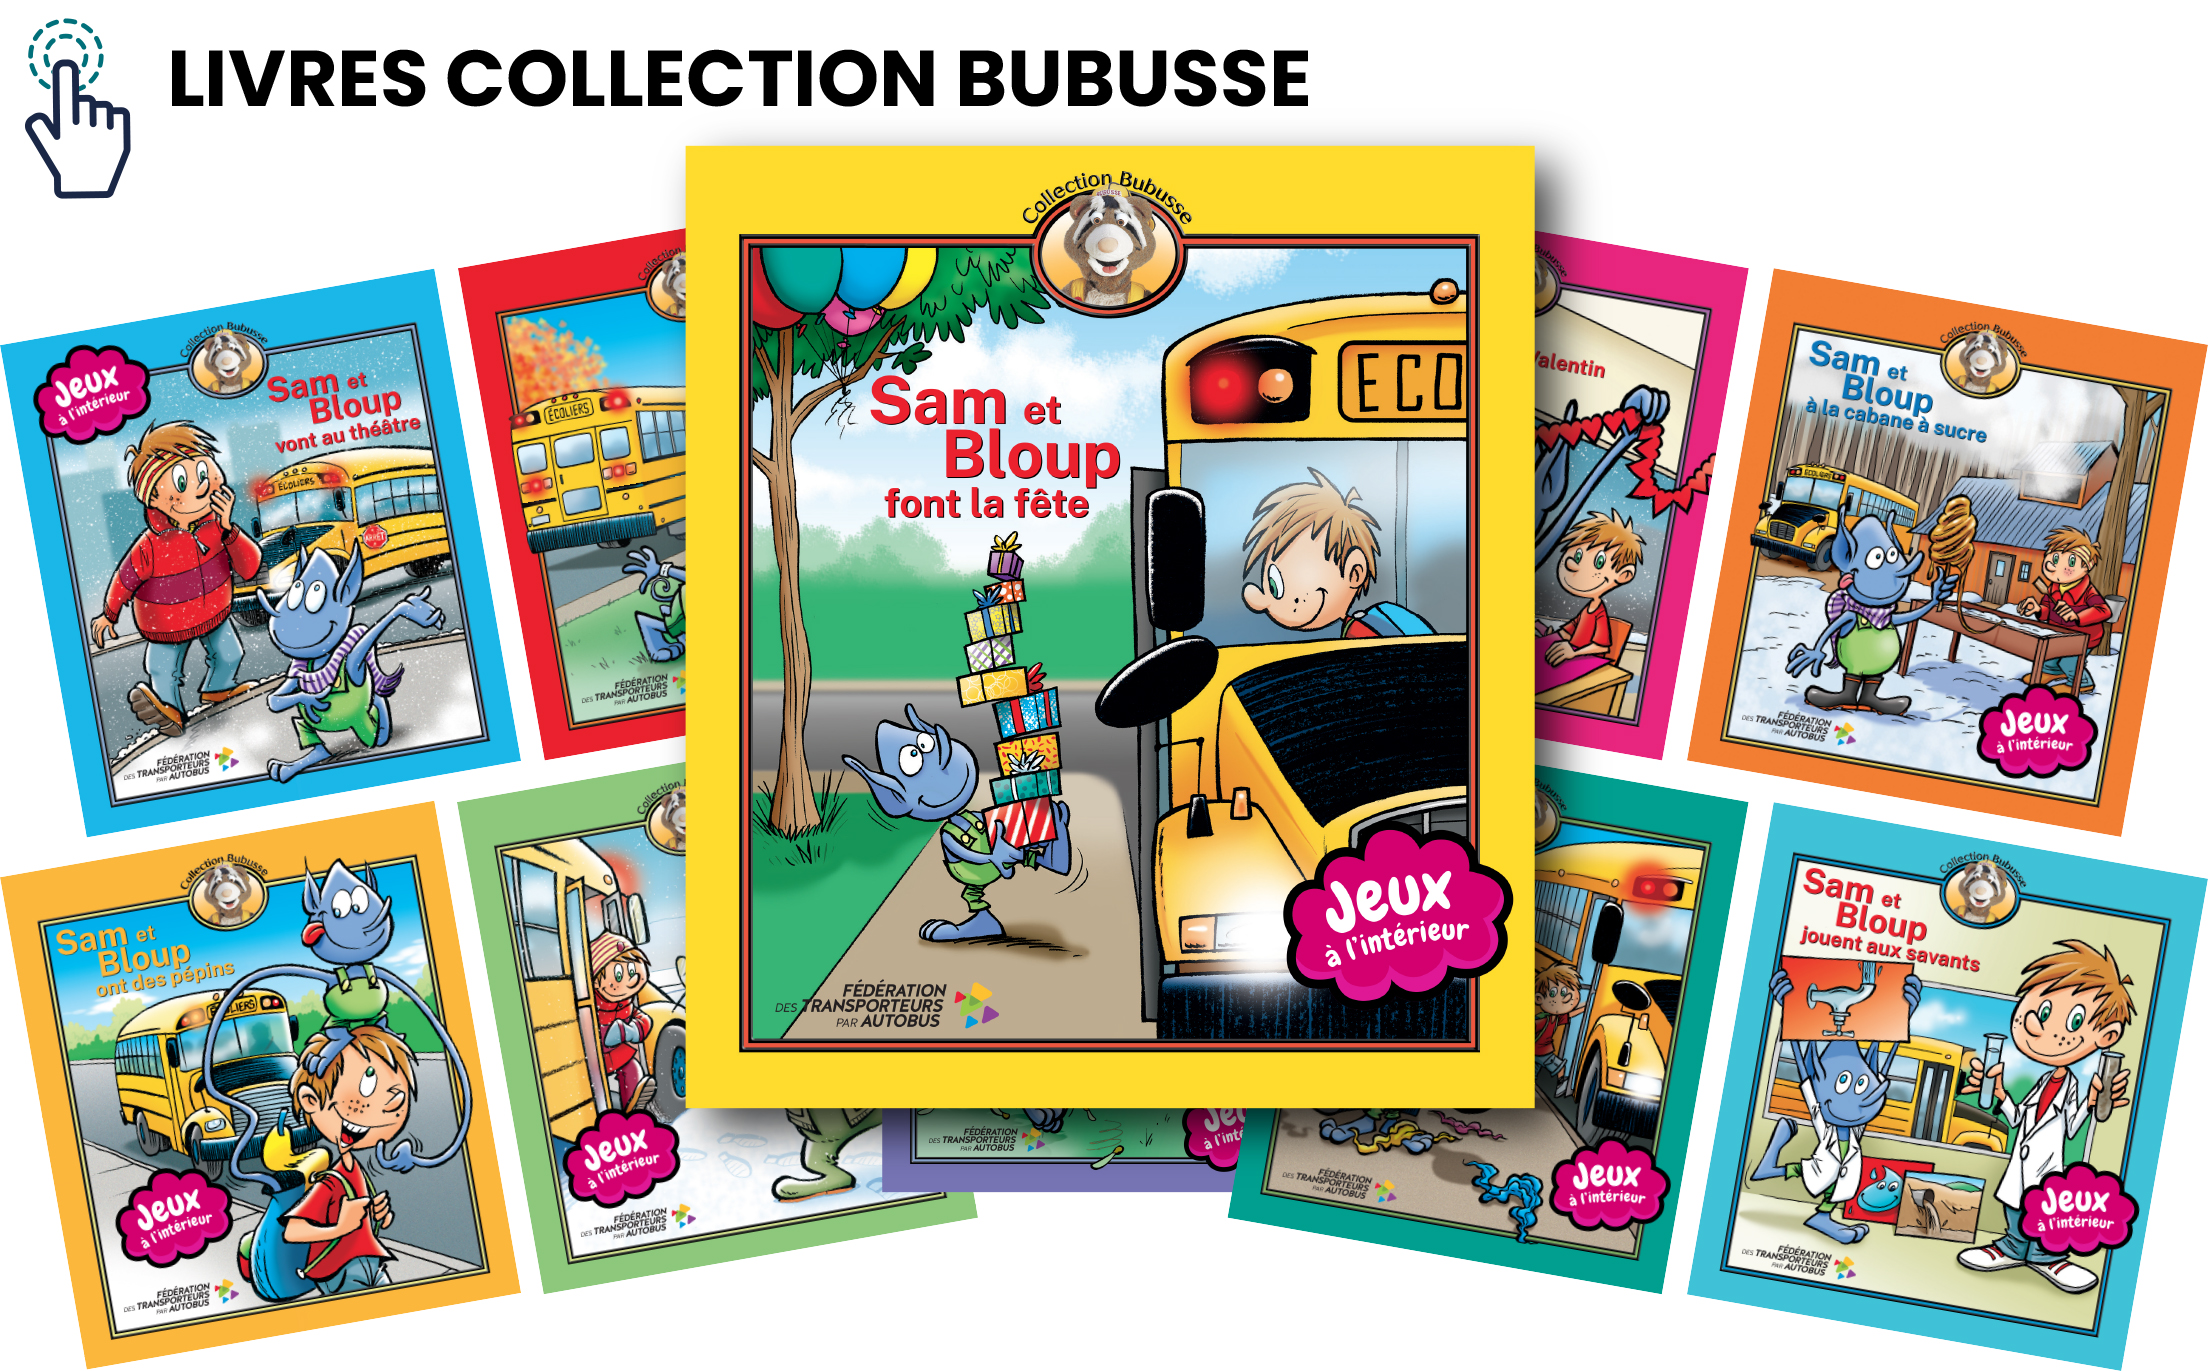 Livres collection Bubusse